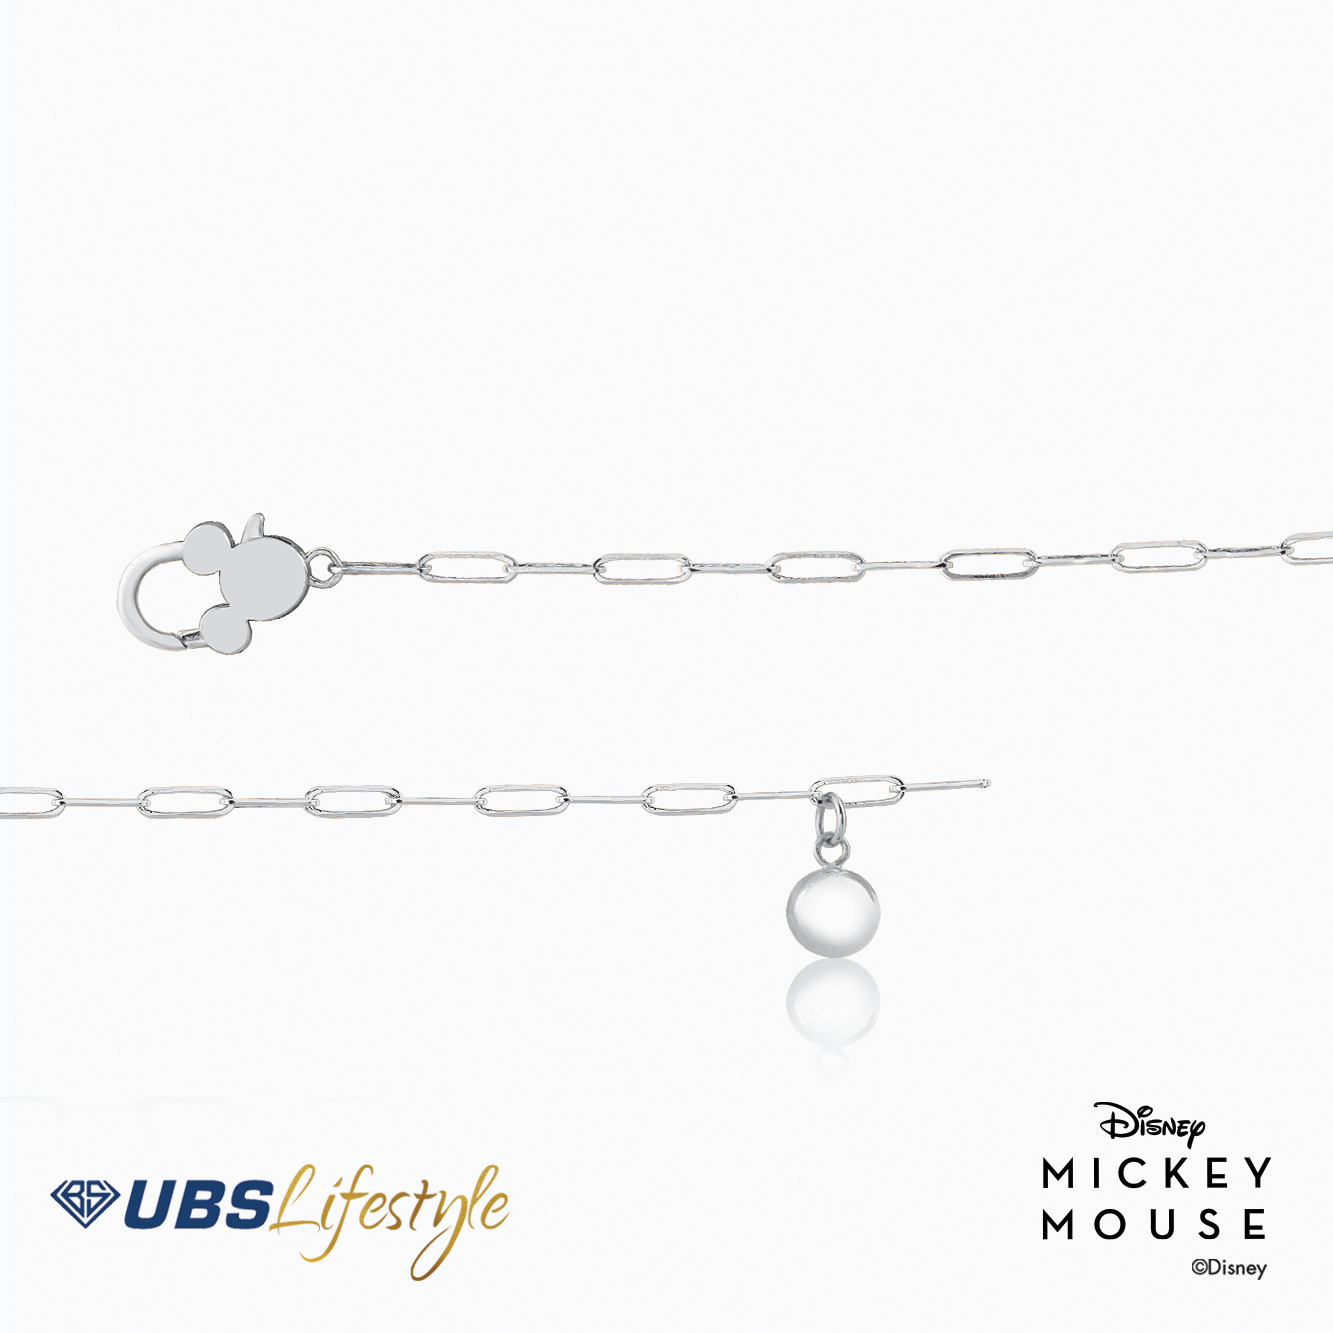 UBS Gelang Disney Mickey Mouse - Kgy0071 - 17K